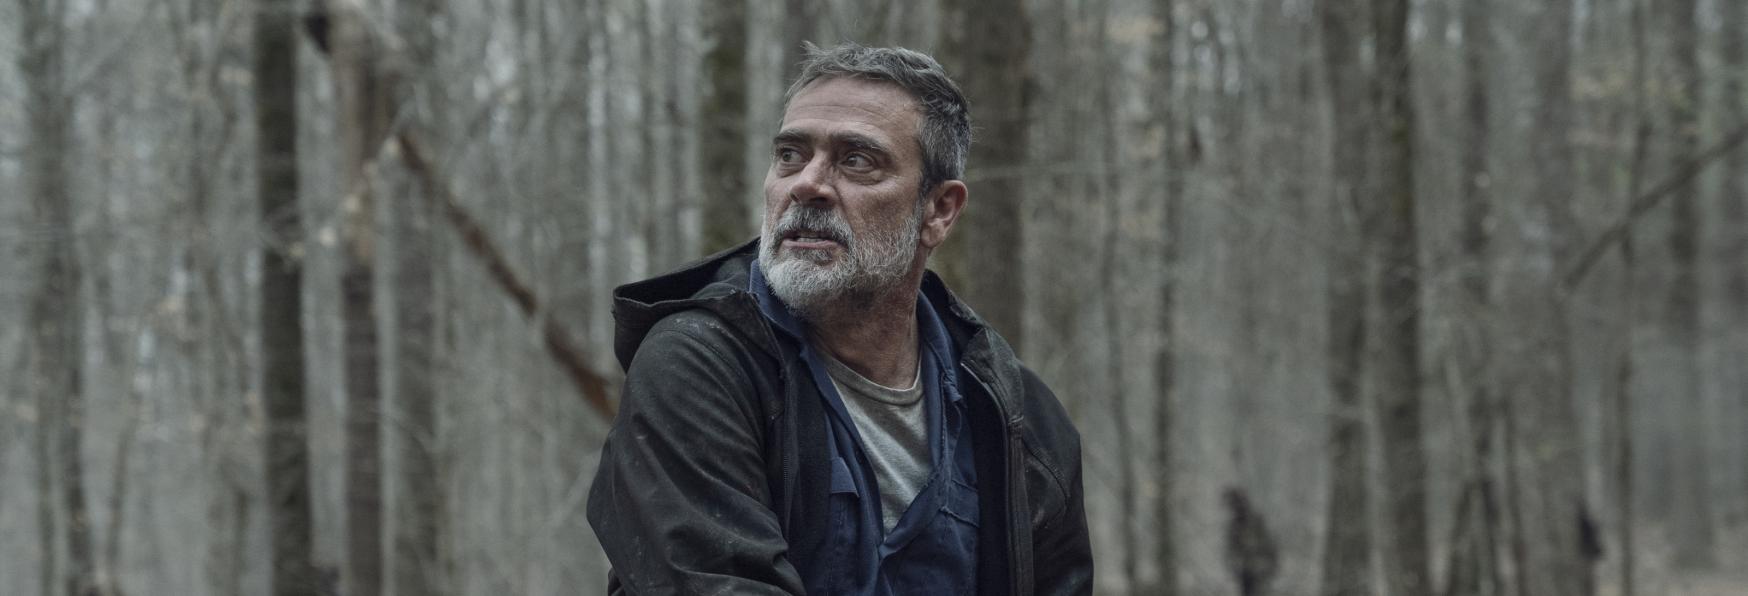 The Boys 4: Jeffrey Dean Morgan (The Walking Dead) will appear in the new Episodes